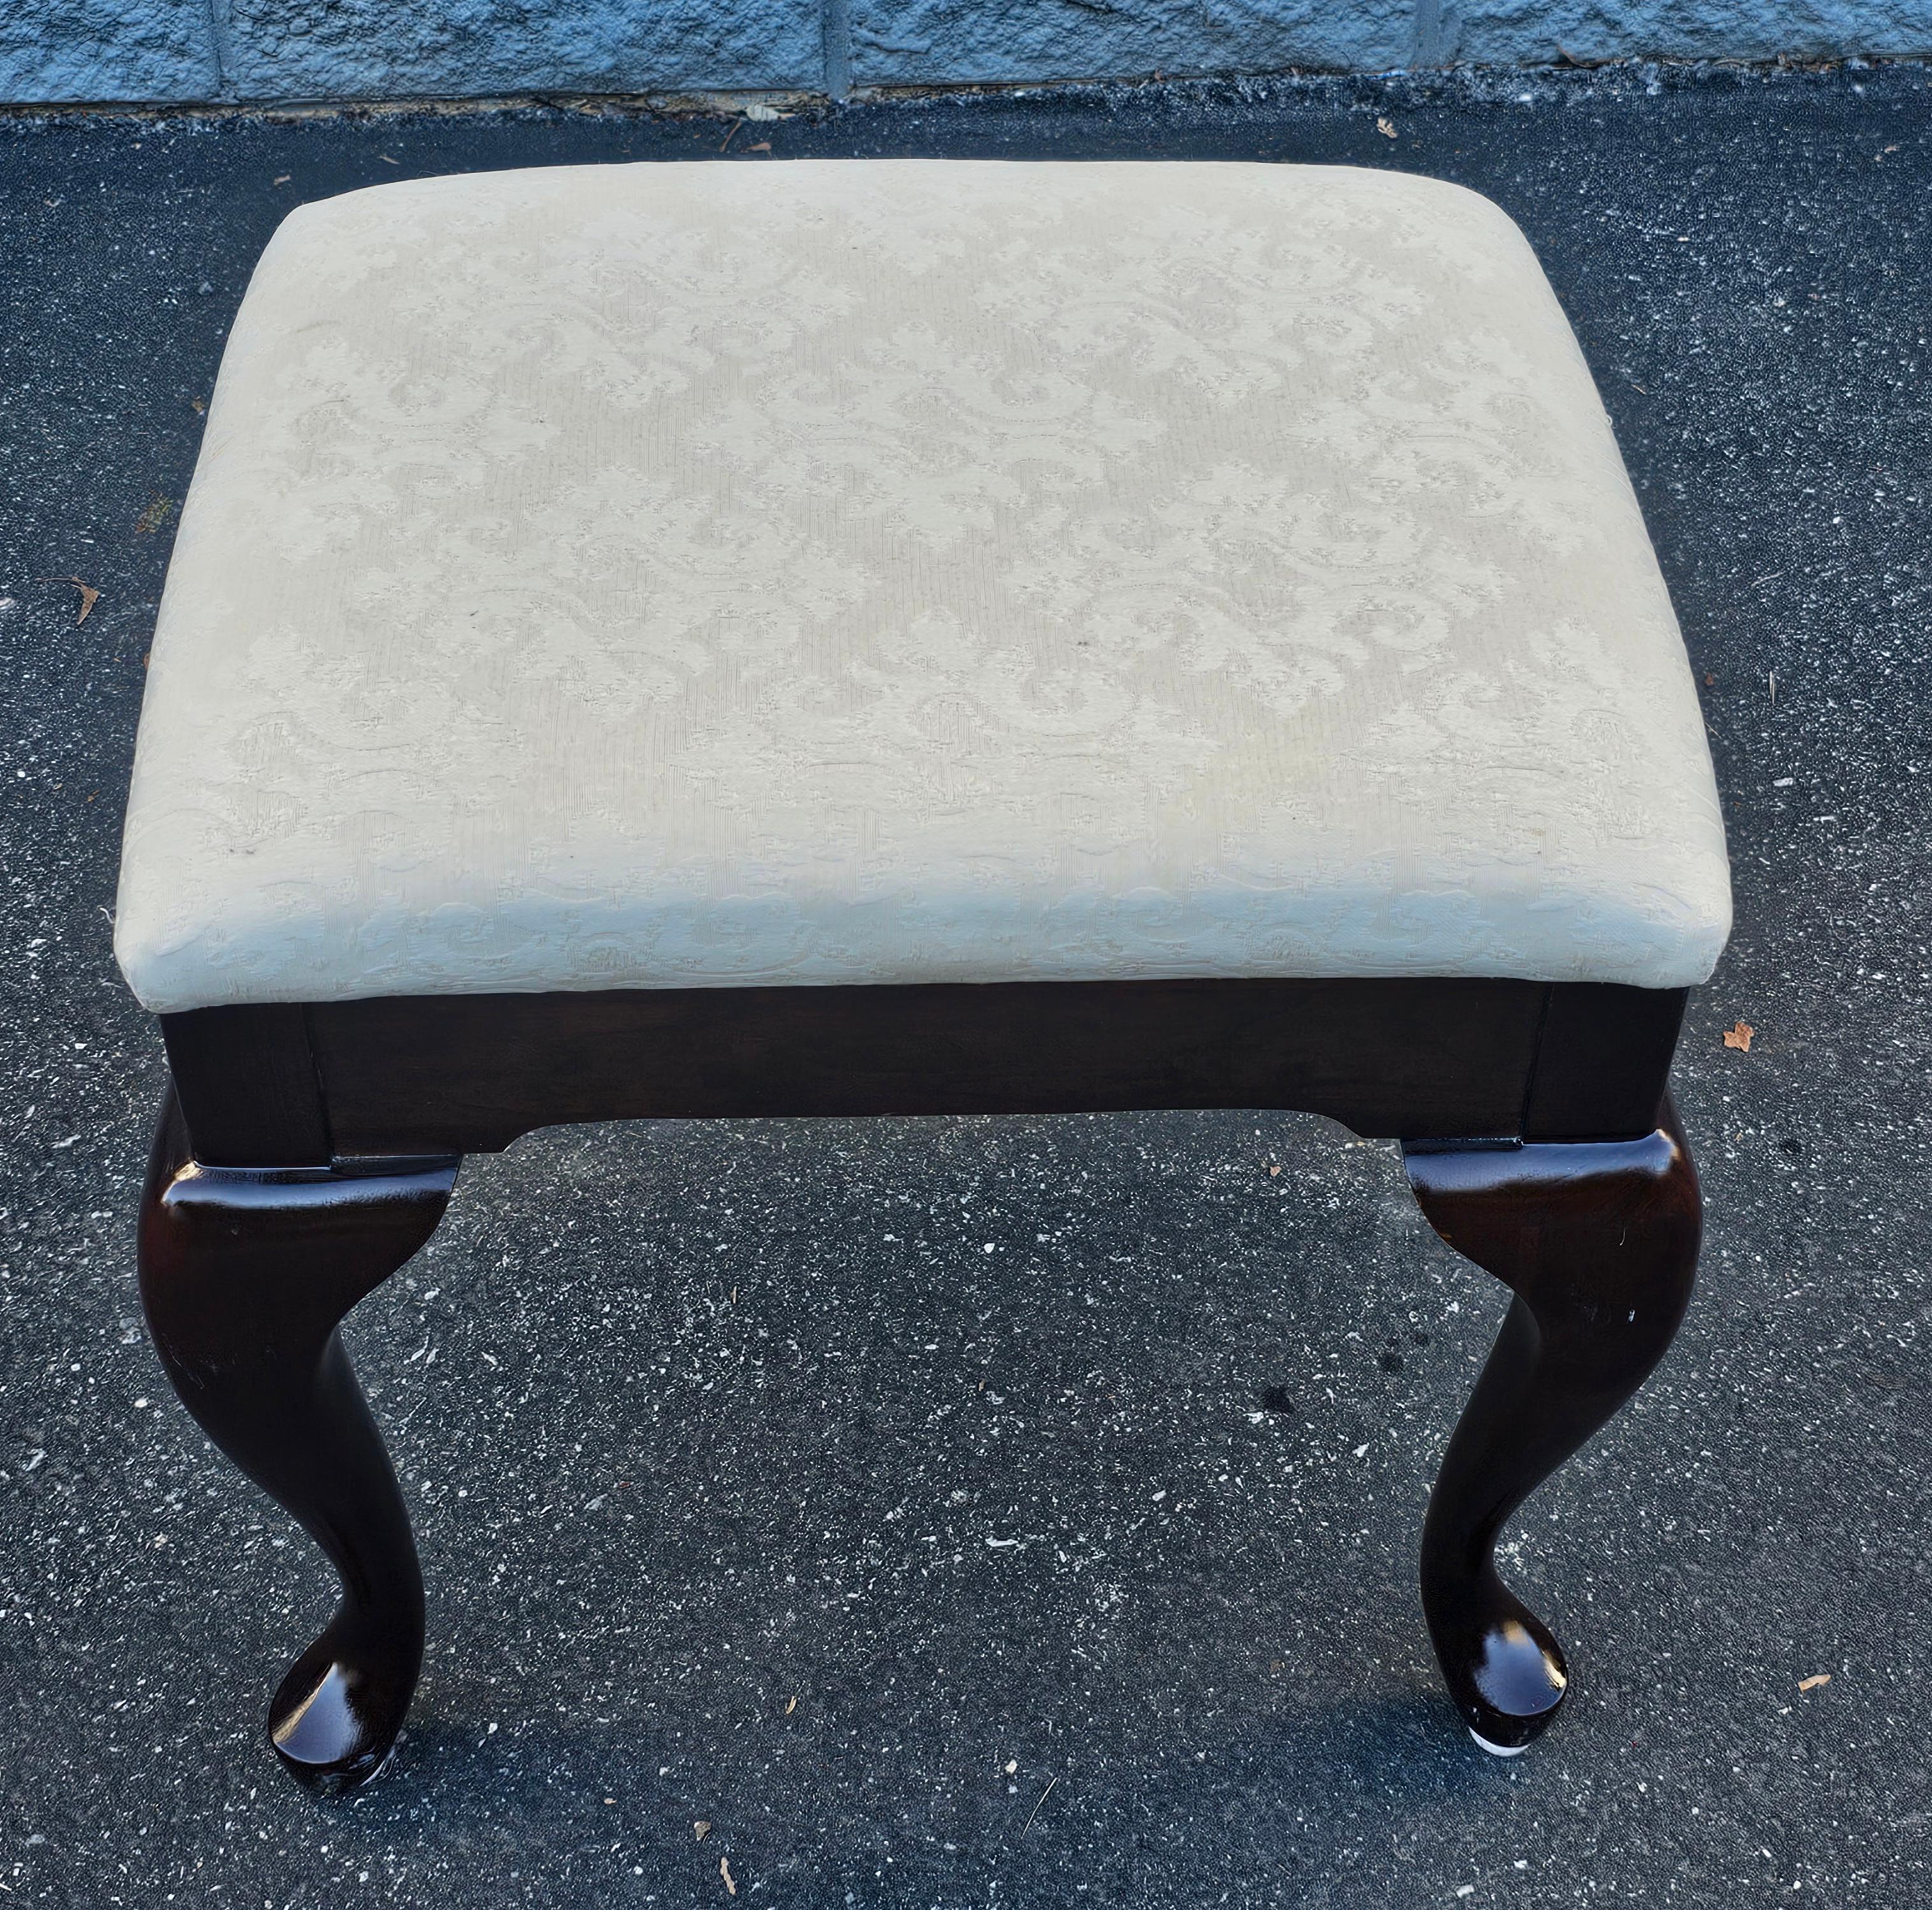 A Late 20th Century Queen Anne Styly Solid Cherry and Upholstered Vanity Bench. Measures 20